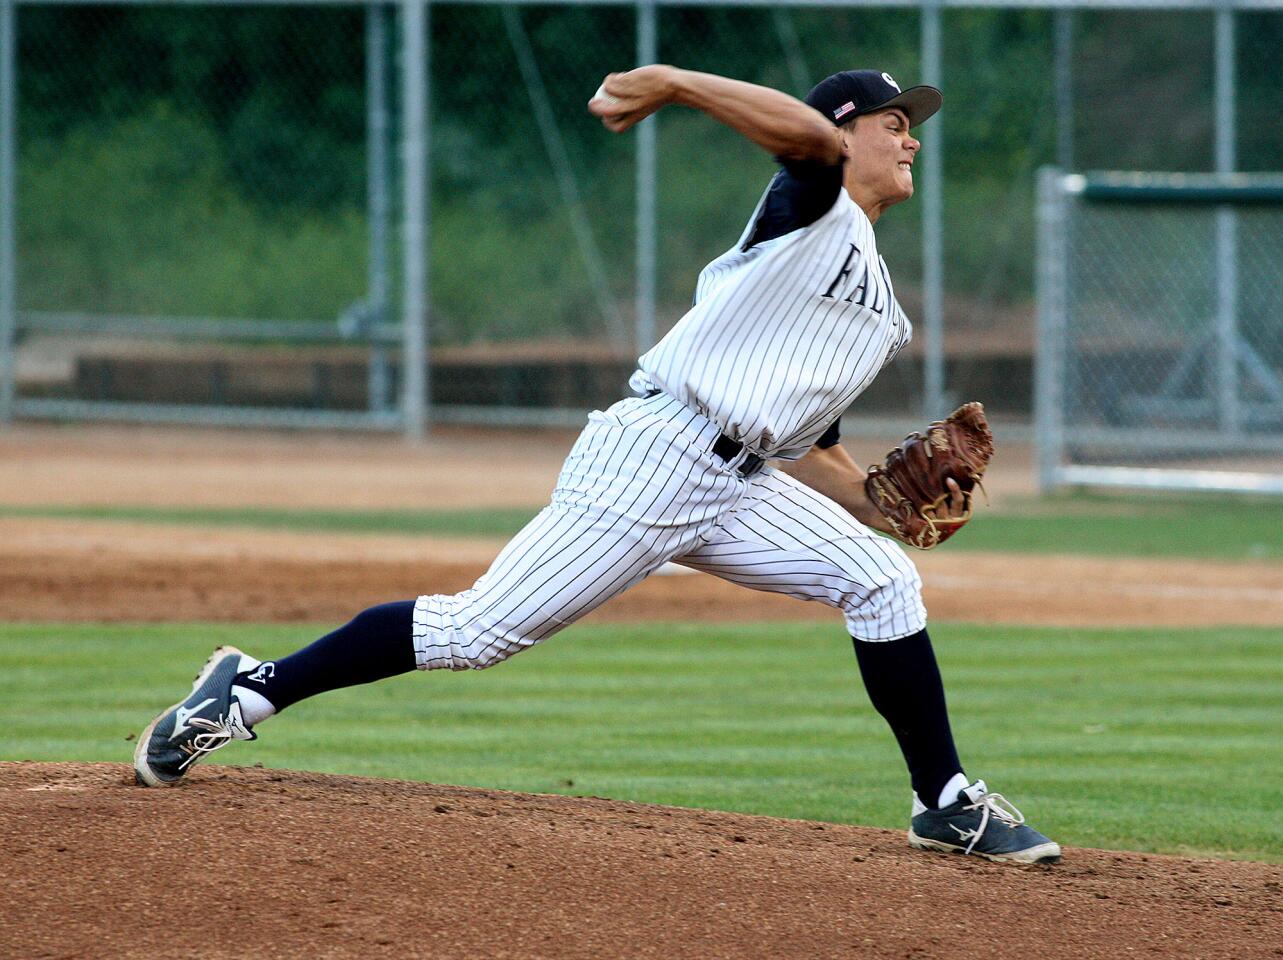 Crescenta Valley's Jimmy Smiley pitches early in the game against Glendale in a Pacific League baseball game at Stengel Field in Glendale on Friday, May 2, 2014.